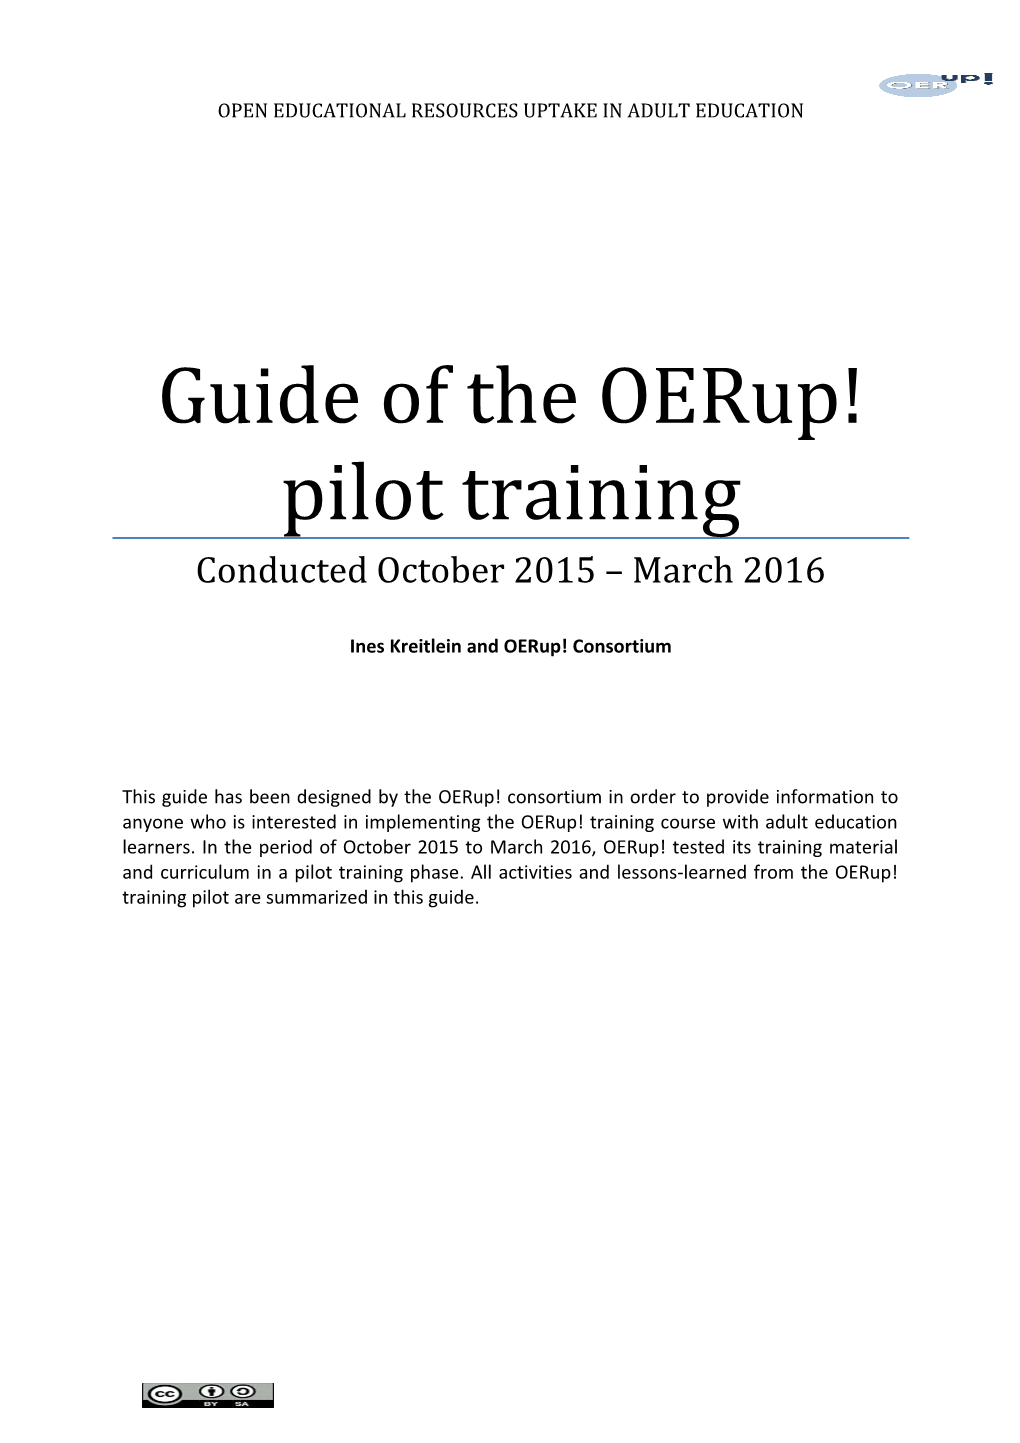 Guide of the Oerup! Pilot Training